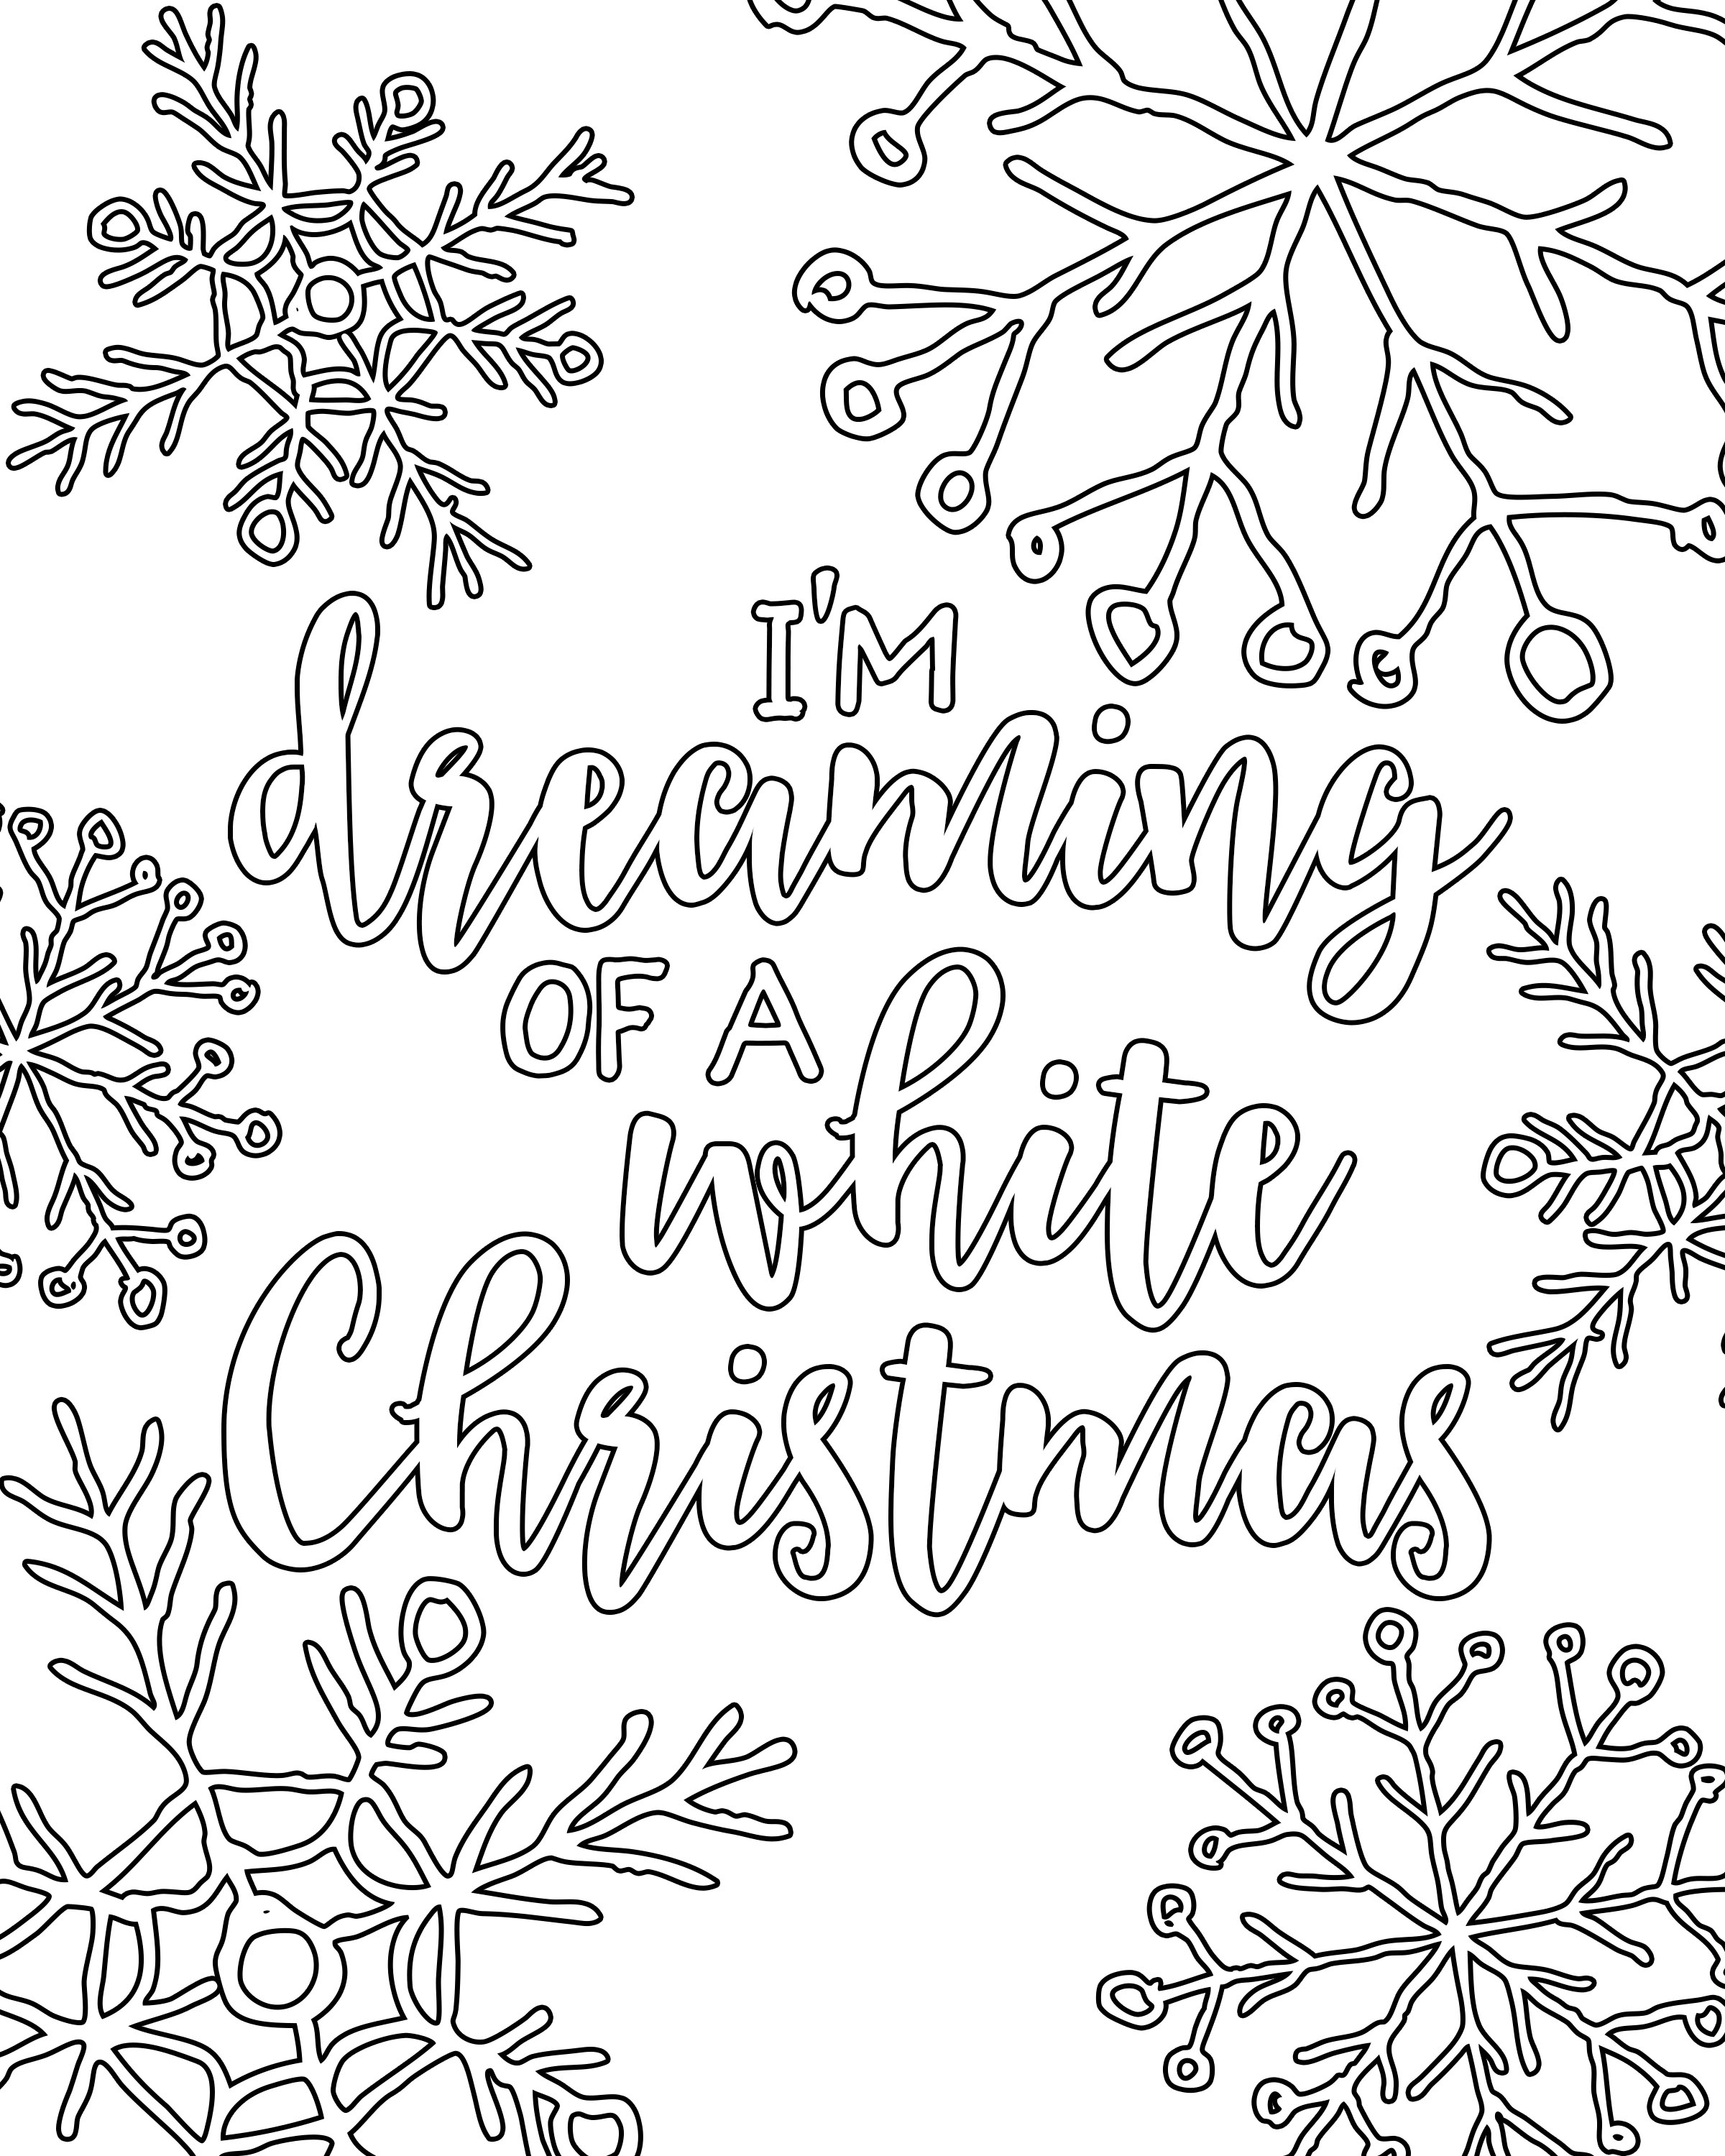 Free Printable White Christmas Adult Coloring Pages | Coloring Pages - Free Printable Christmas Coloring Pages